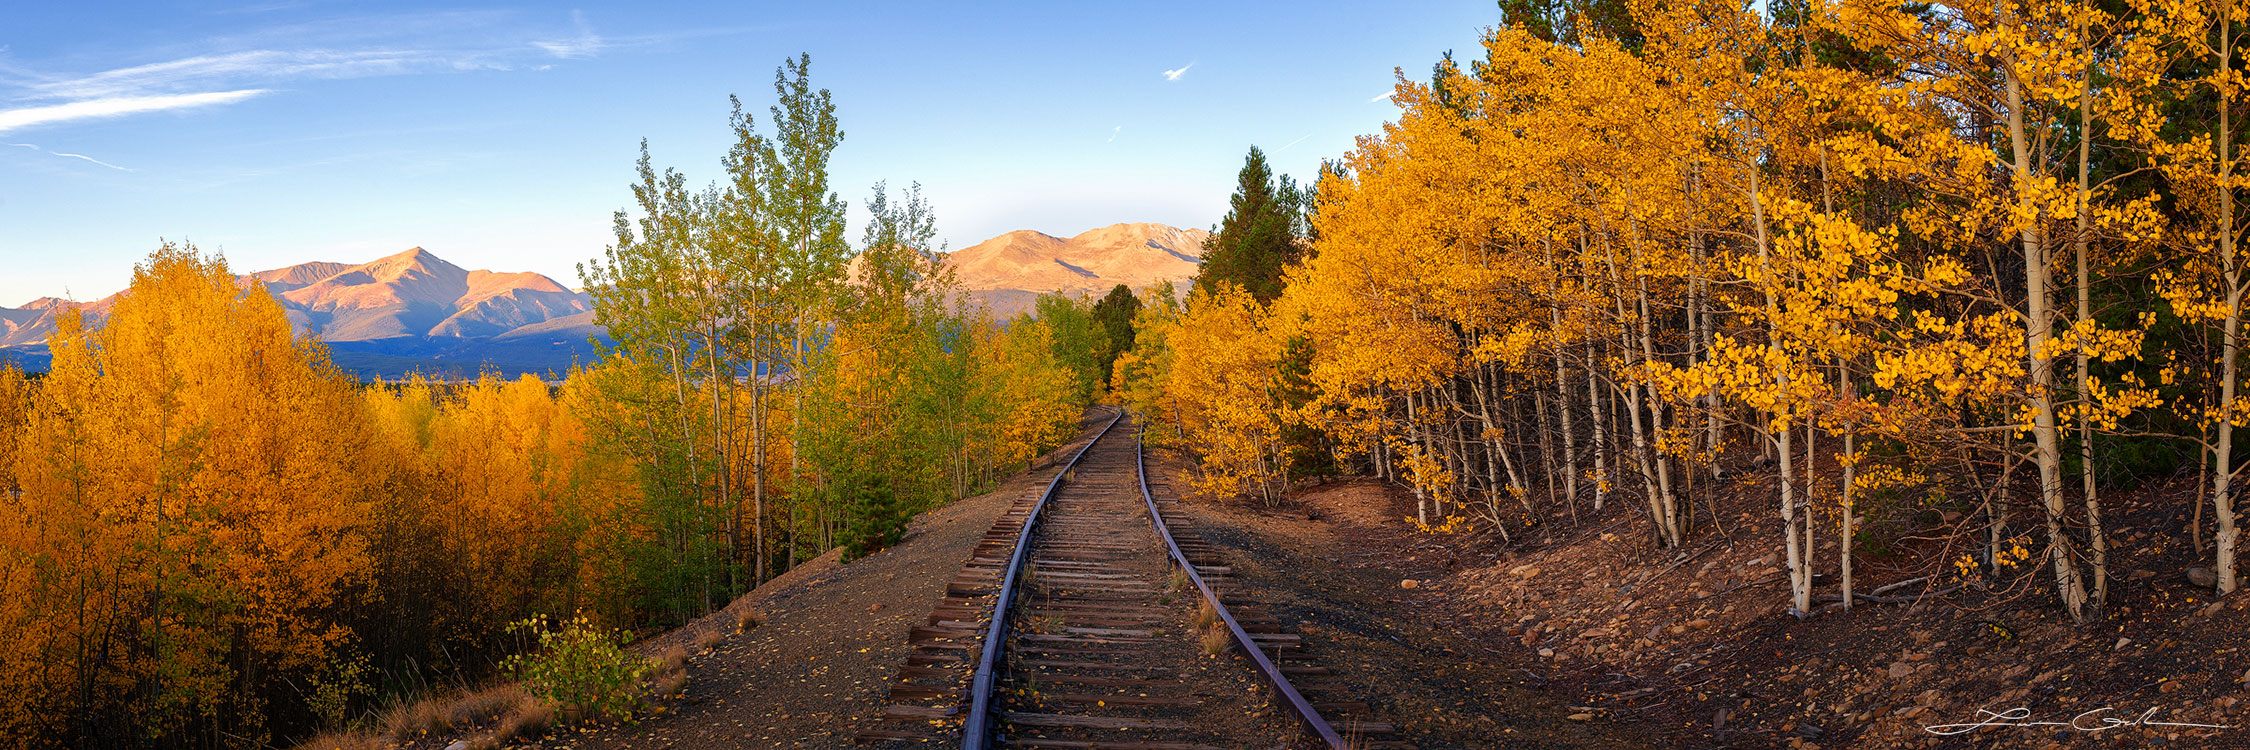 Mountain Railroad Fall Colors: Abandoned railway cutting through vibrant aspen forest with Mount Elbert in the distance. Serene early morning scene capturing the essence of autumn colors and Colorado's natural beauty. - Gintchin Fine Art